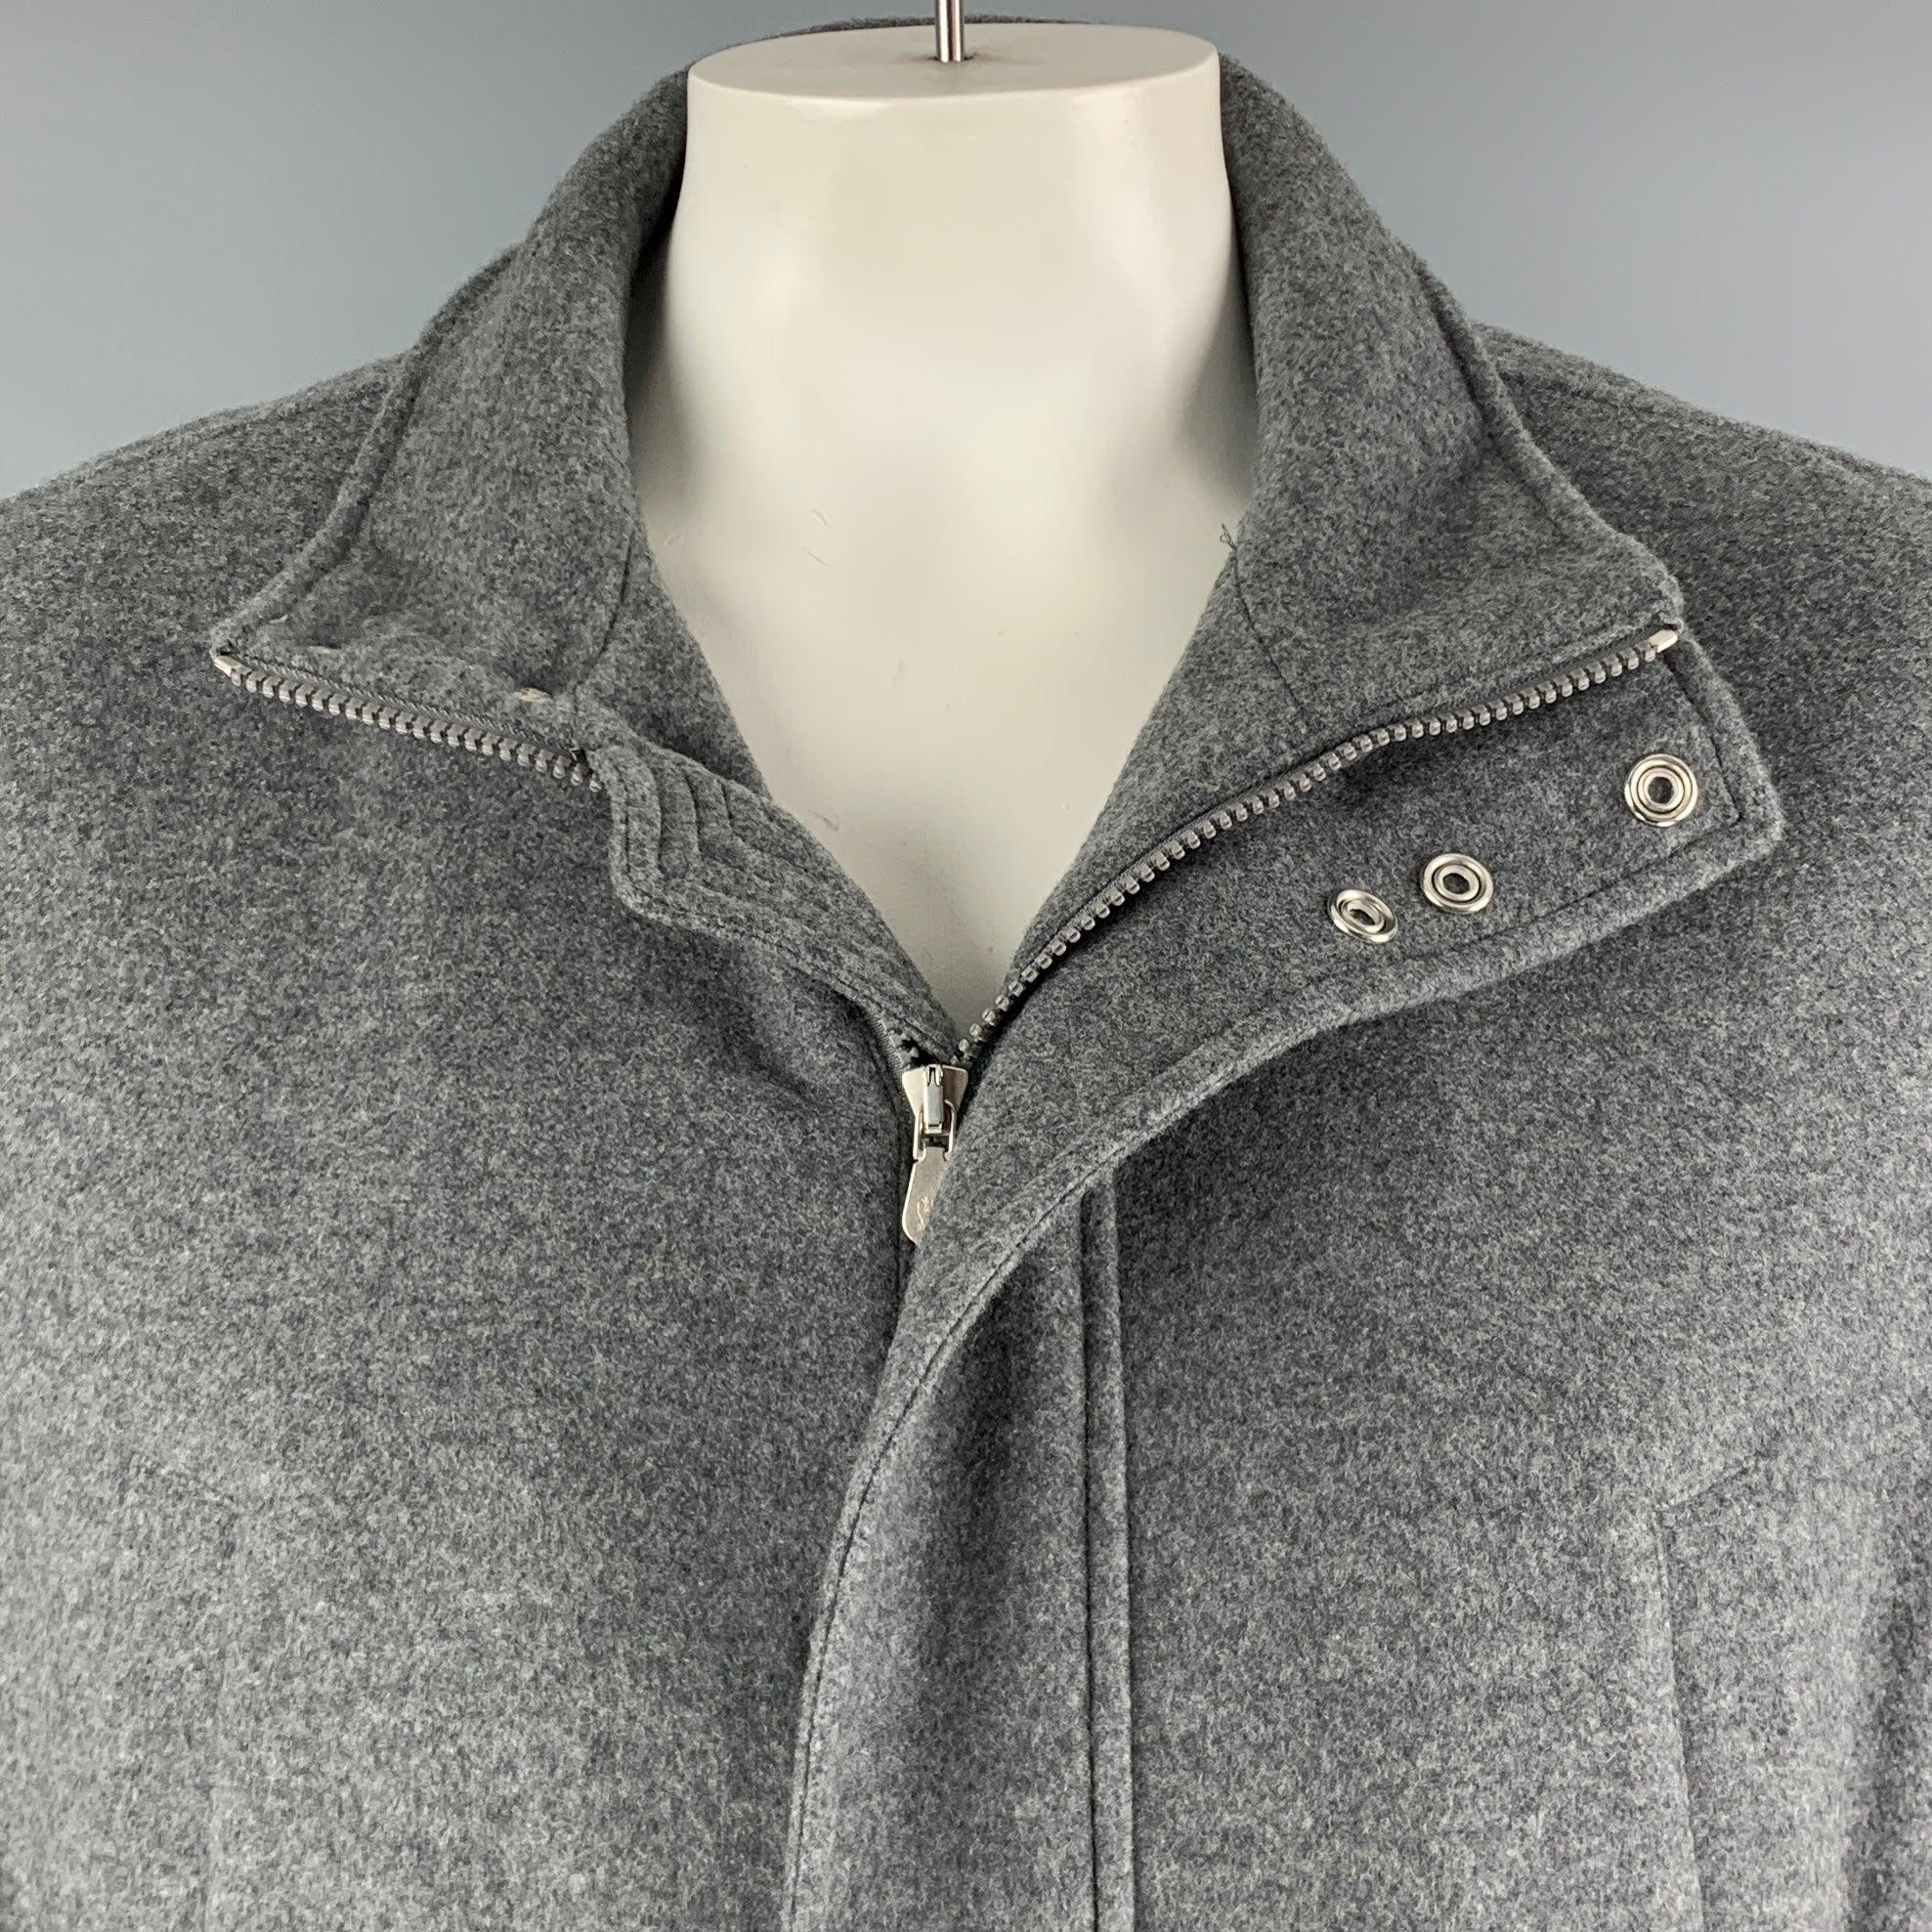 BRUNELLO CUCINELLI jacket
in a
grey cashmere fabric featuring a detachable hood, and zip & snaps closure. Made in Italy.Excellent Pre-Owned Condition. 

Marked:   56 

Measurements: 
 
Shoulder: 18 inches Chest: 47 inches Sleeve: 26 inches Length: